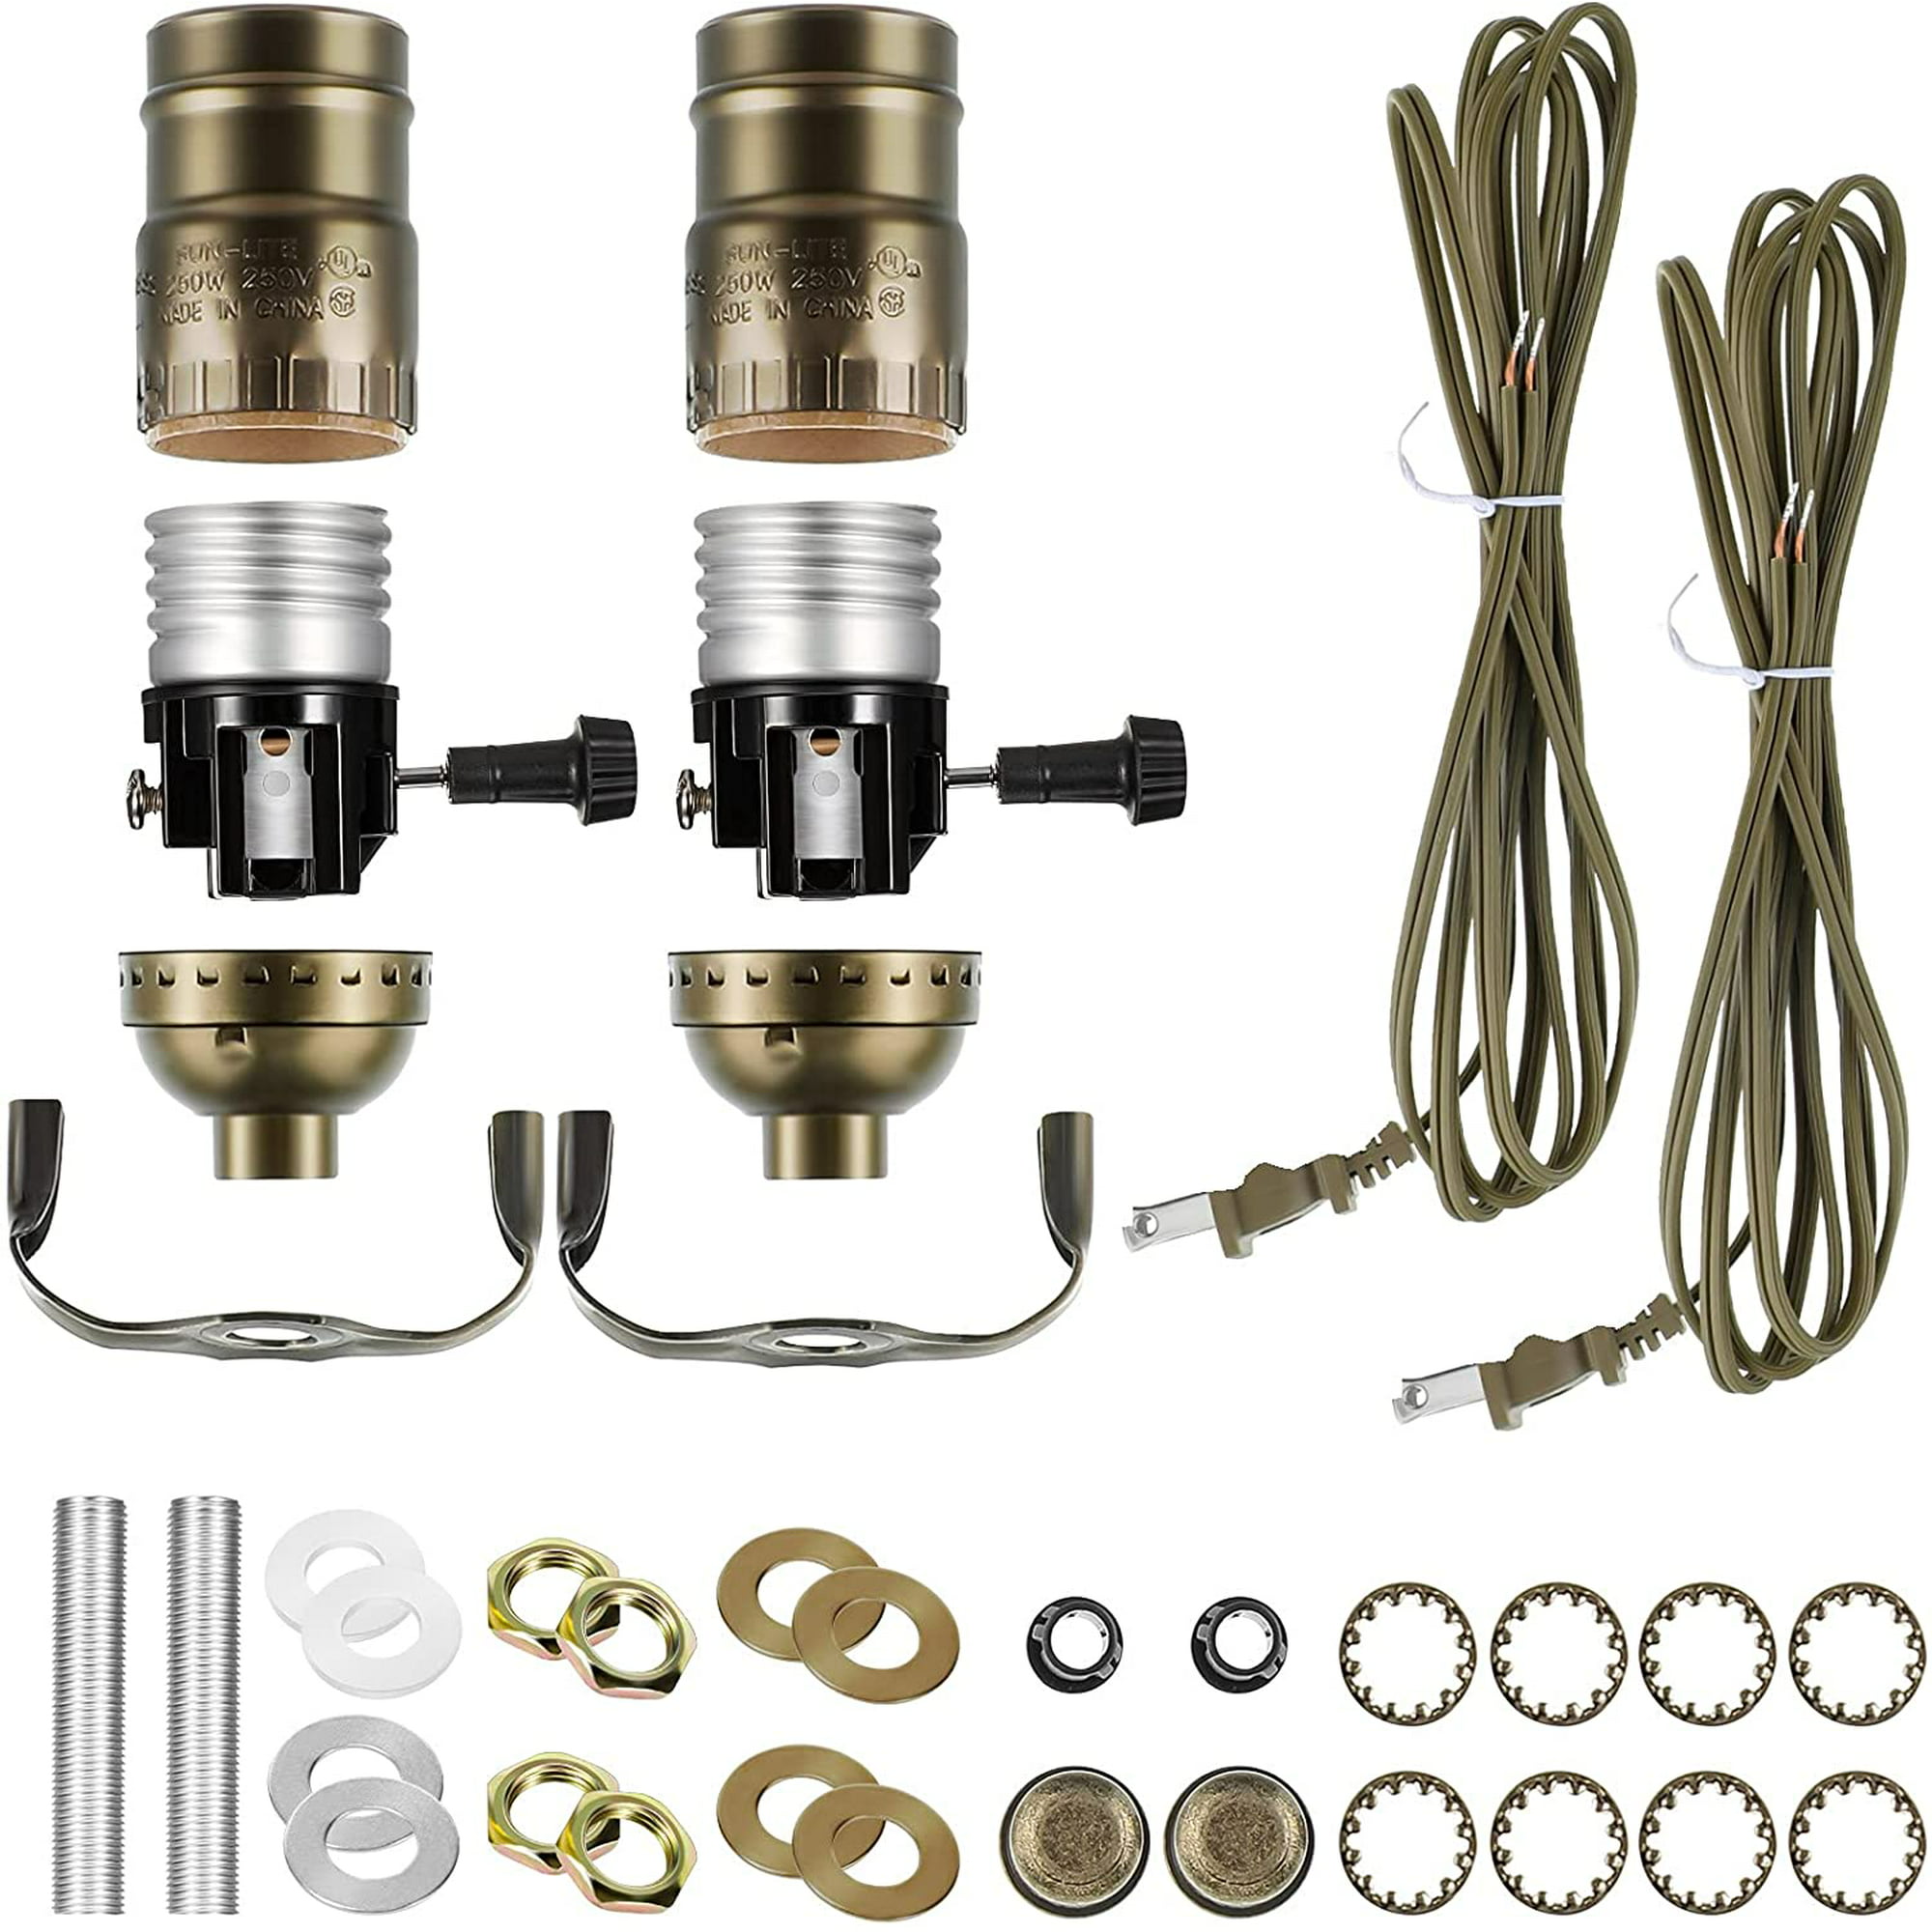 Table Lamp Wiring Kit With 12 Foot Cord, Table Lamp Making Kit